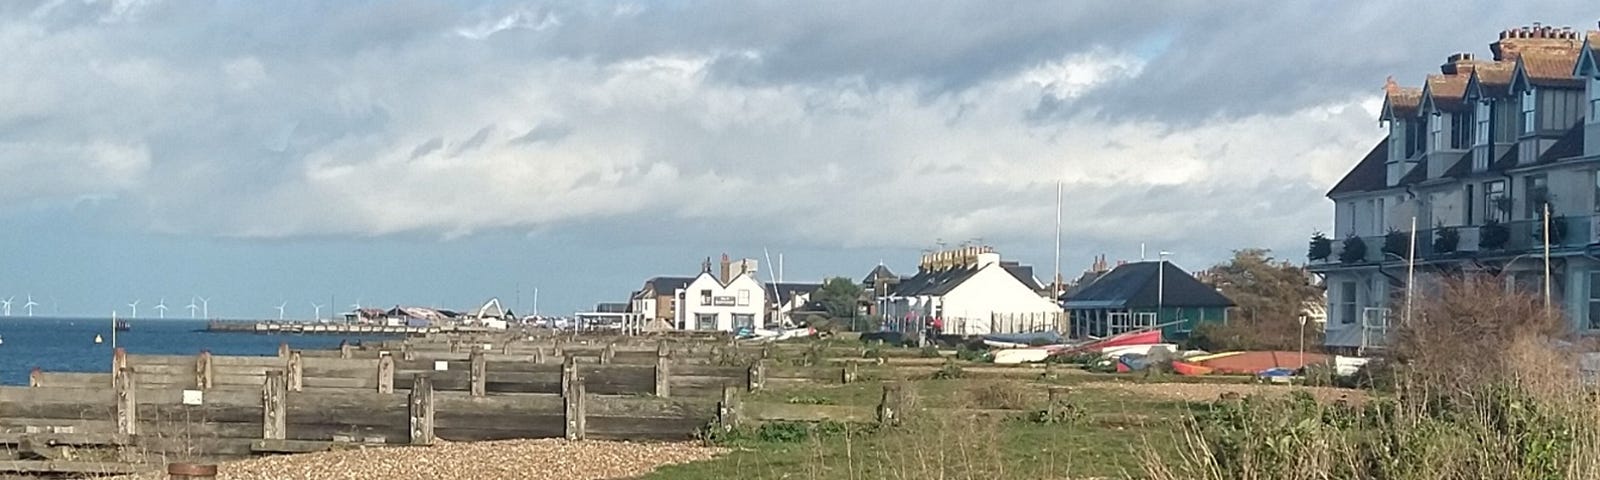 A photograph of my local pub which is on the beach.